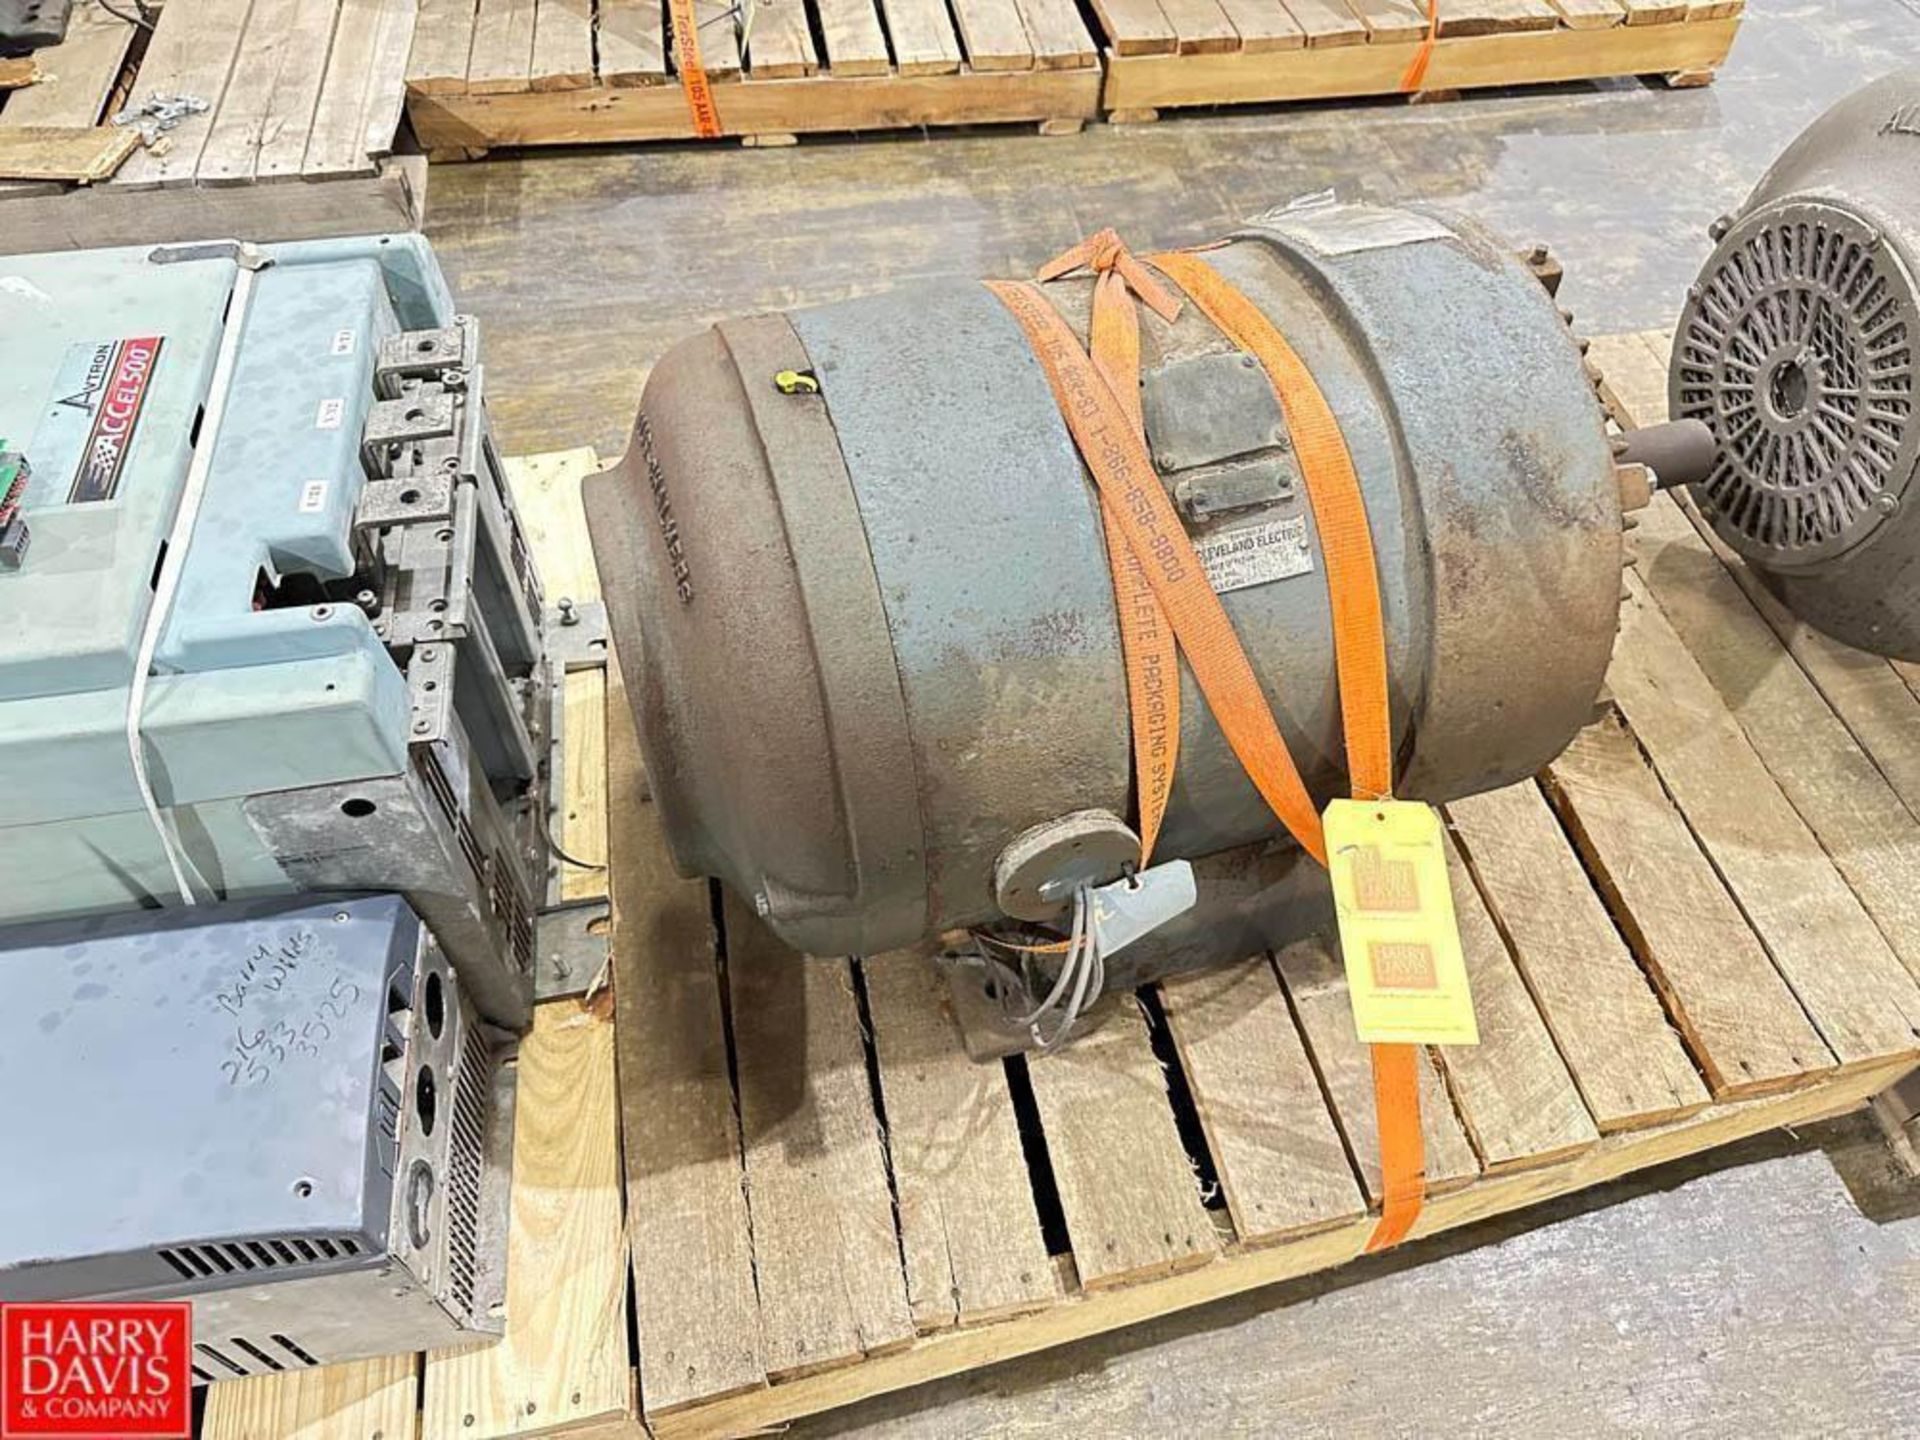 Cleveland Electric 20 HP 860 RPM Motor - Rigging Fee: $50